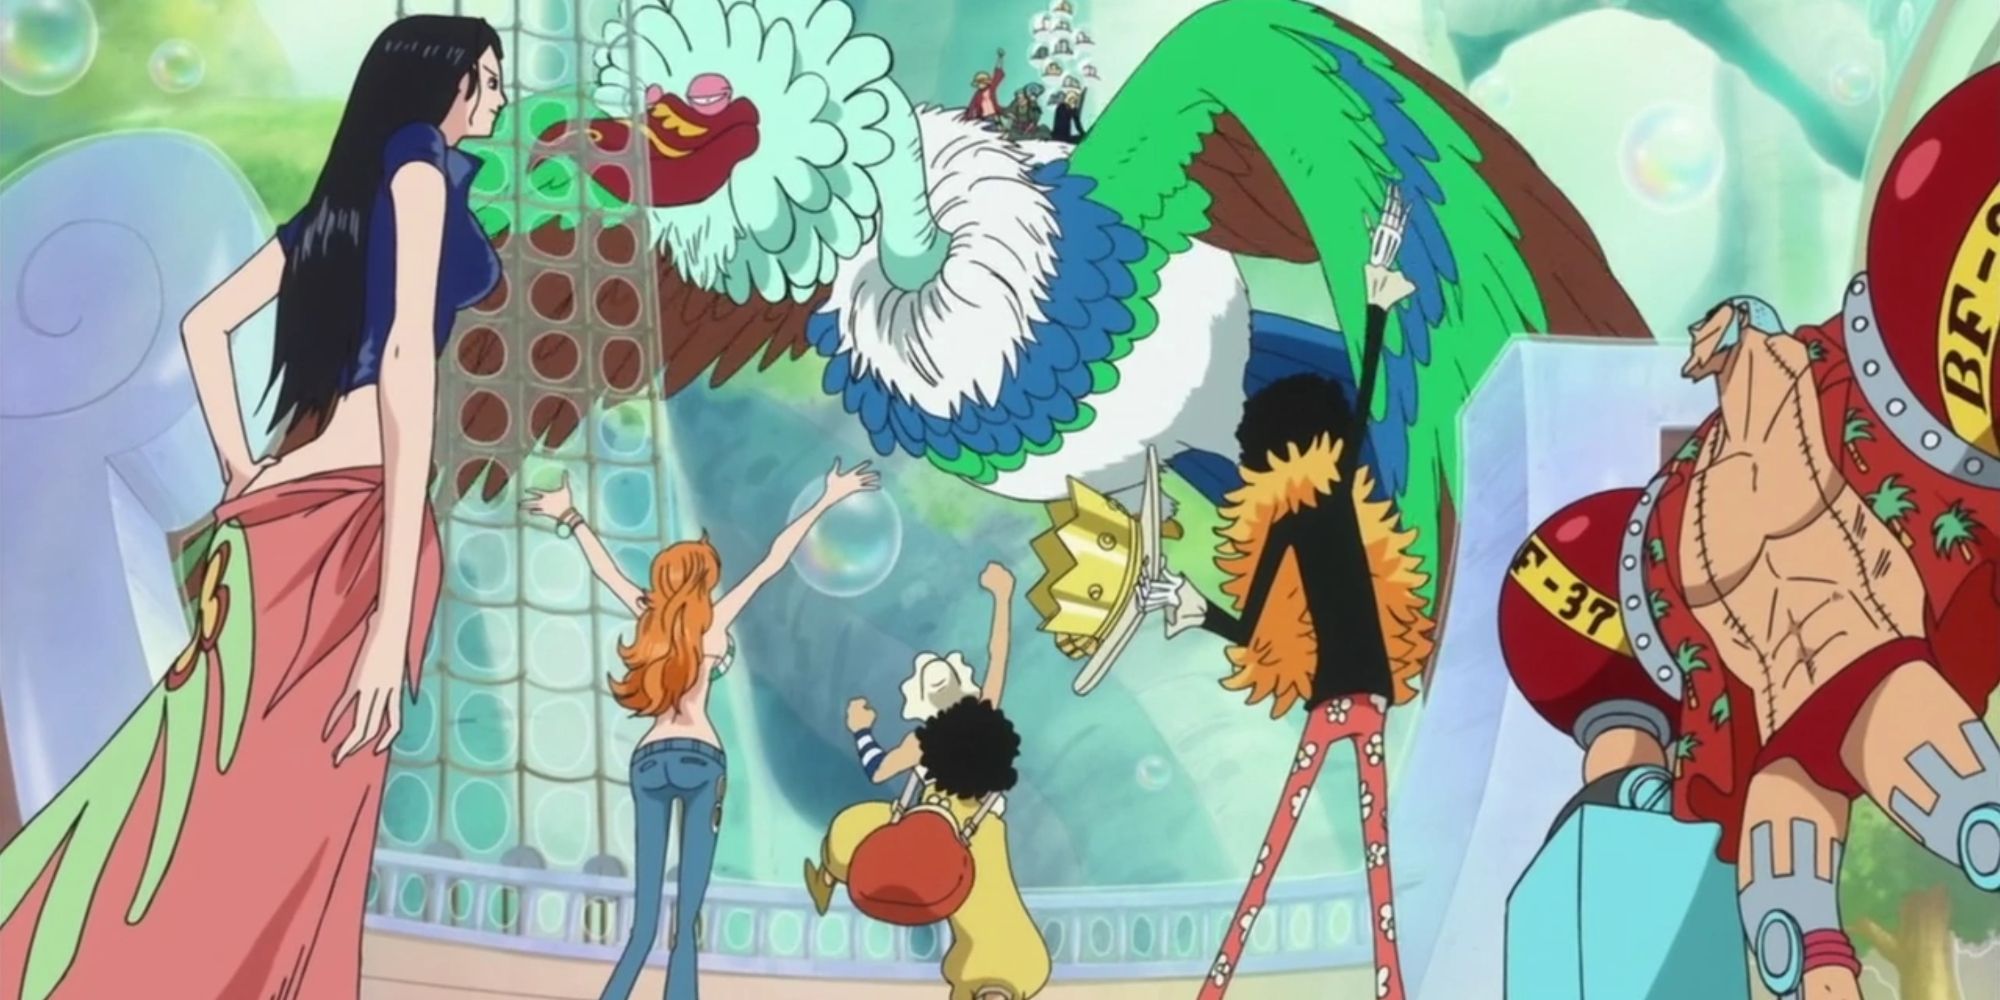 The Straw Hat Pirates are reunited during the events of One Piece's return to Sabaody arc